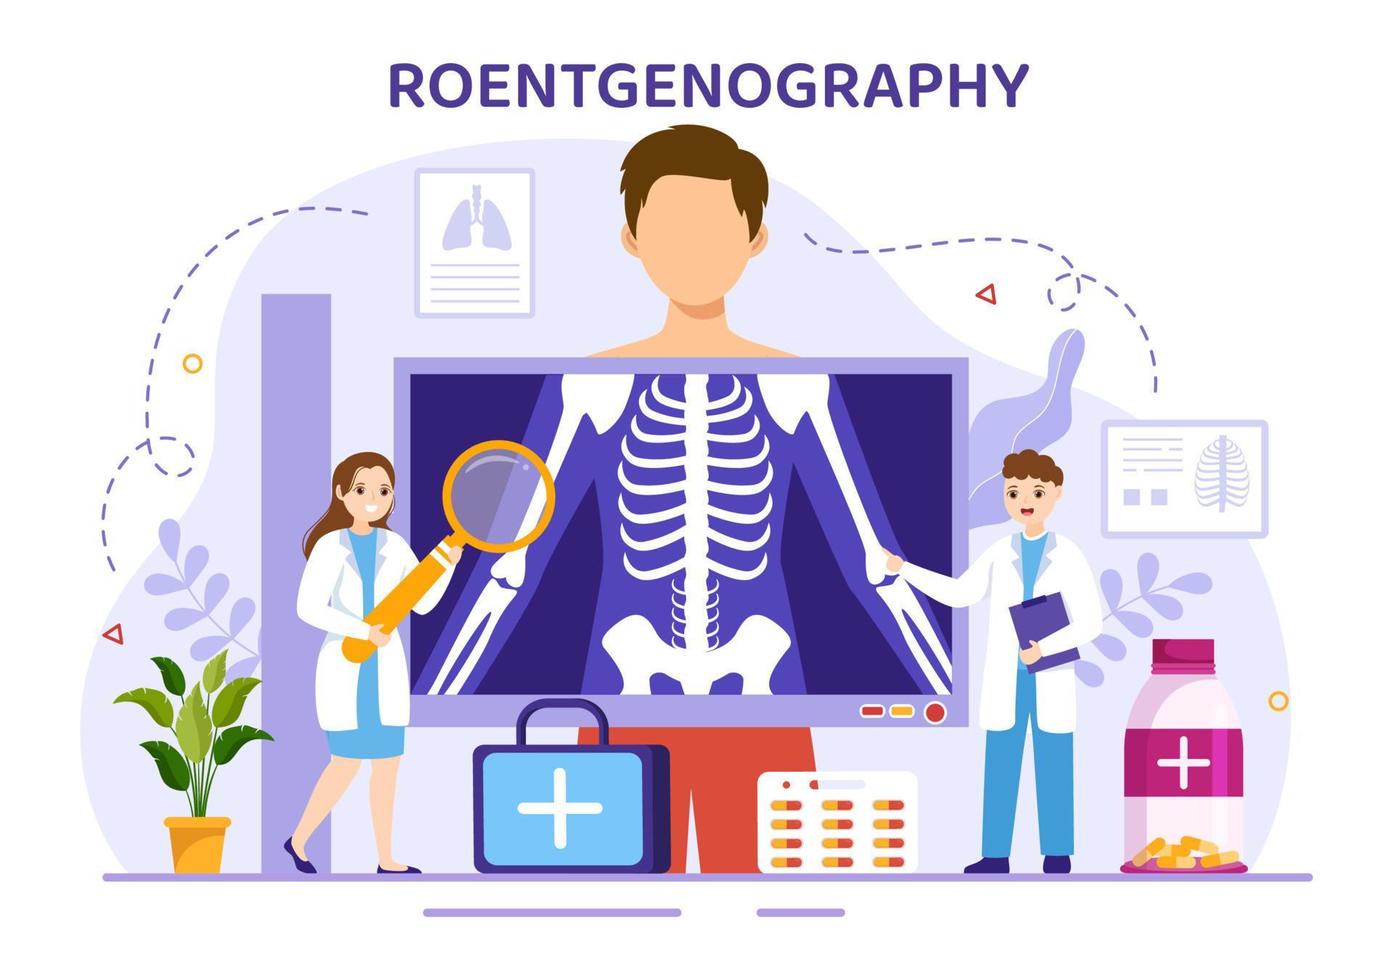 Roentgenography Illustration with Fluorography Body Checkup Procedure, X-ray Scanning or Roentgen in Health Care Flat Cartoon Hand Drawn Templates vector